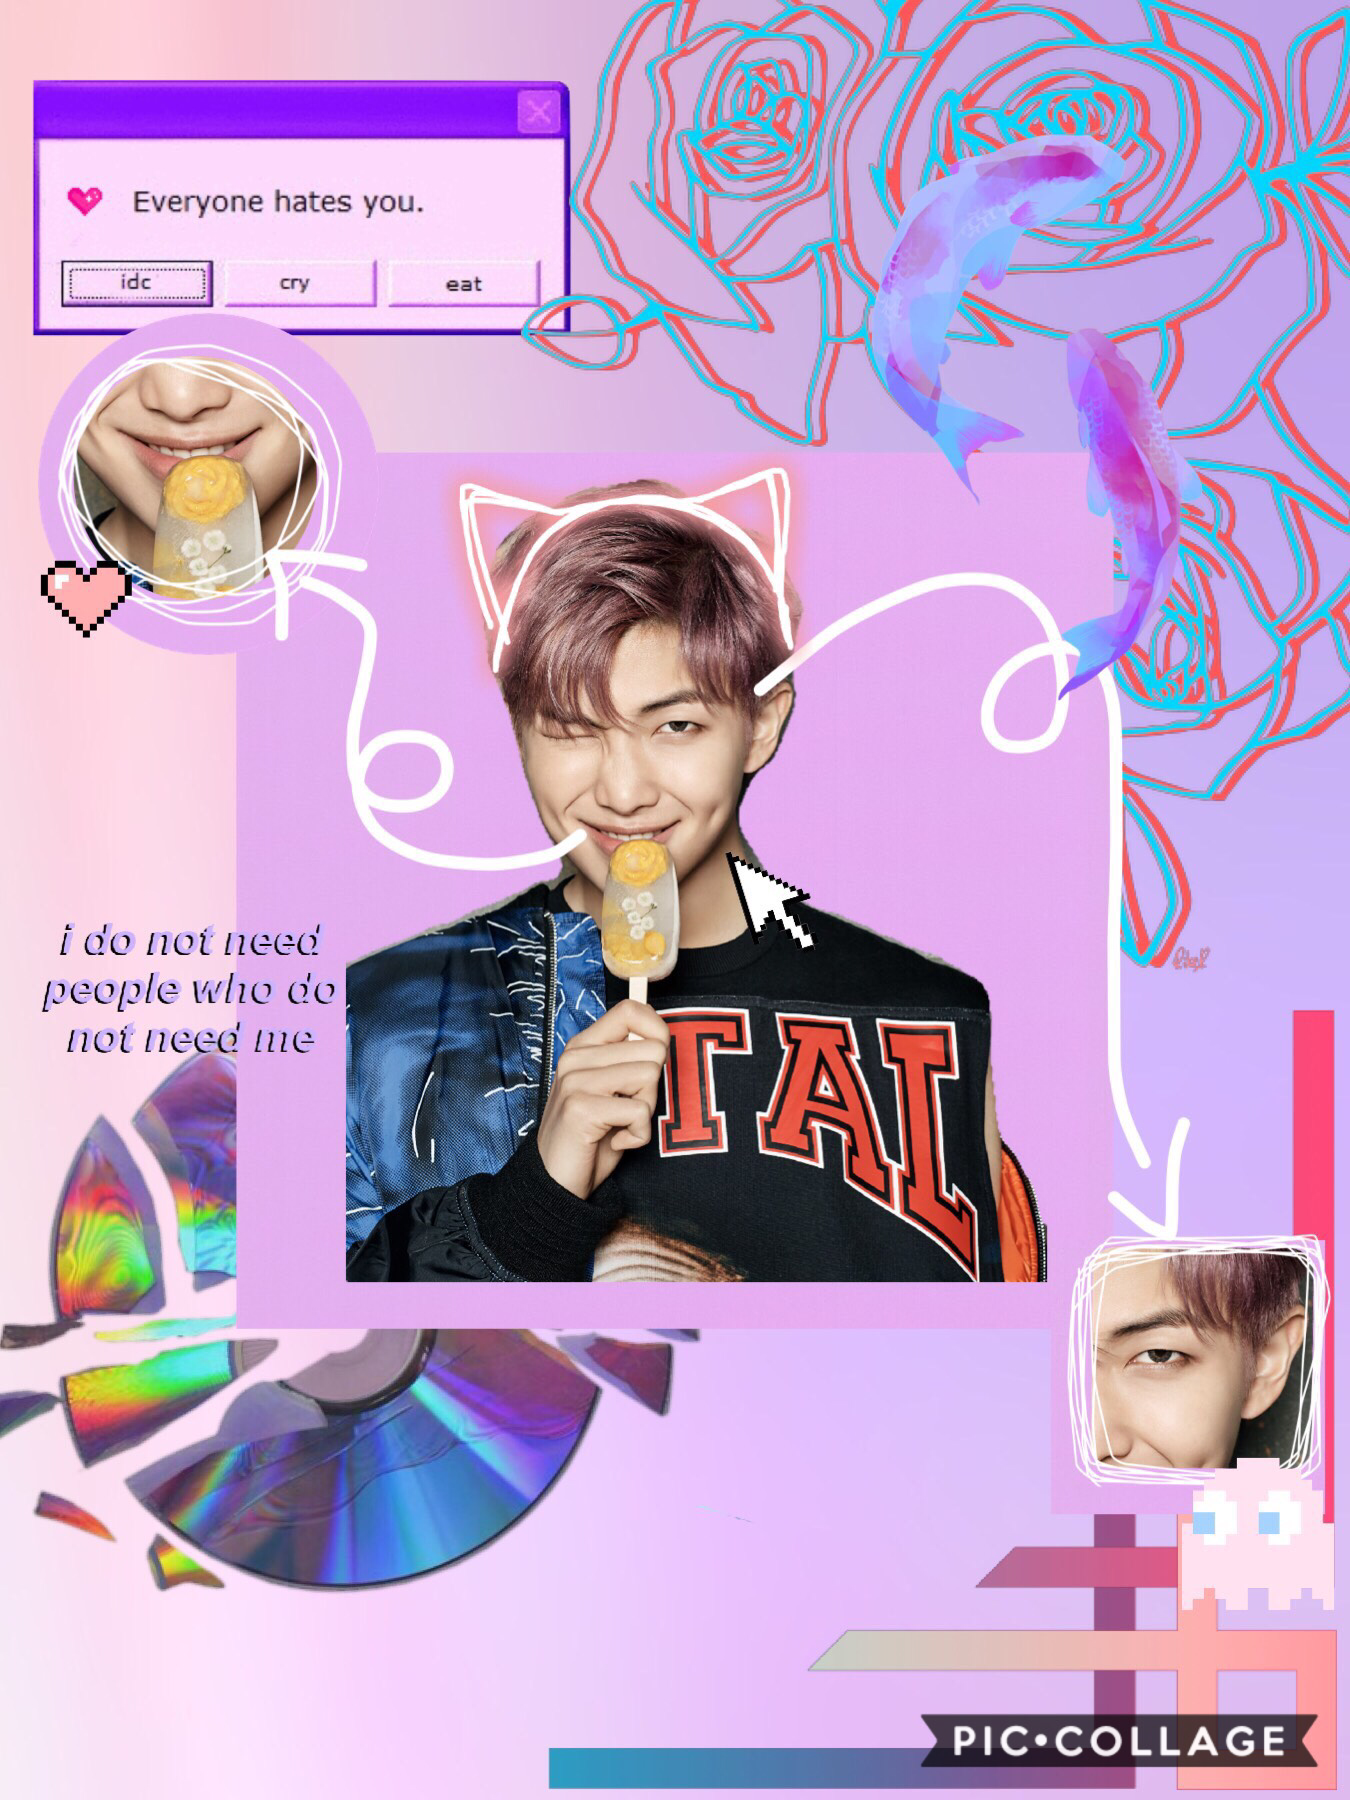 I had so much making this it’s ridiculous 😂😂💜 but omg I am qUAKING at my own art (for once 😂)